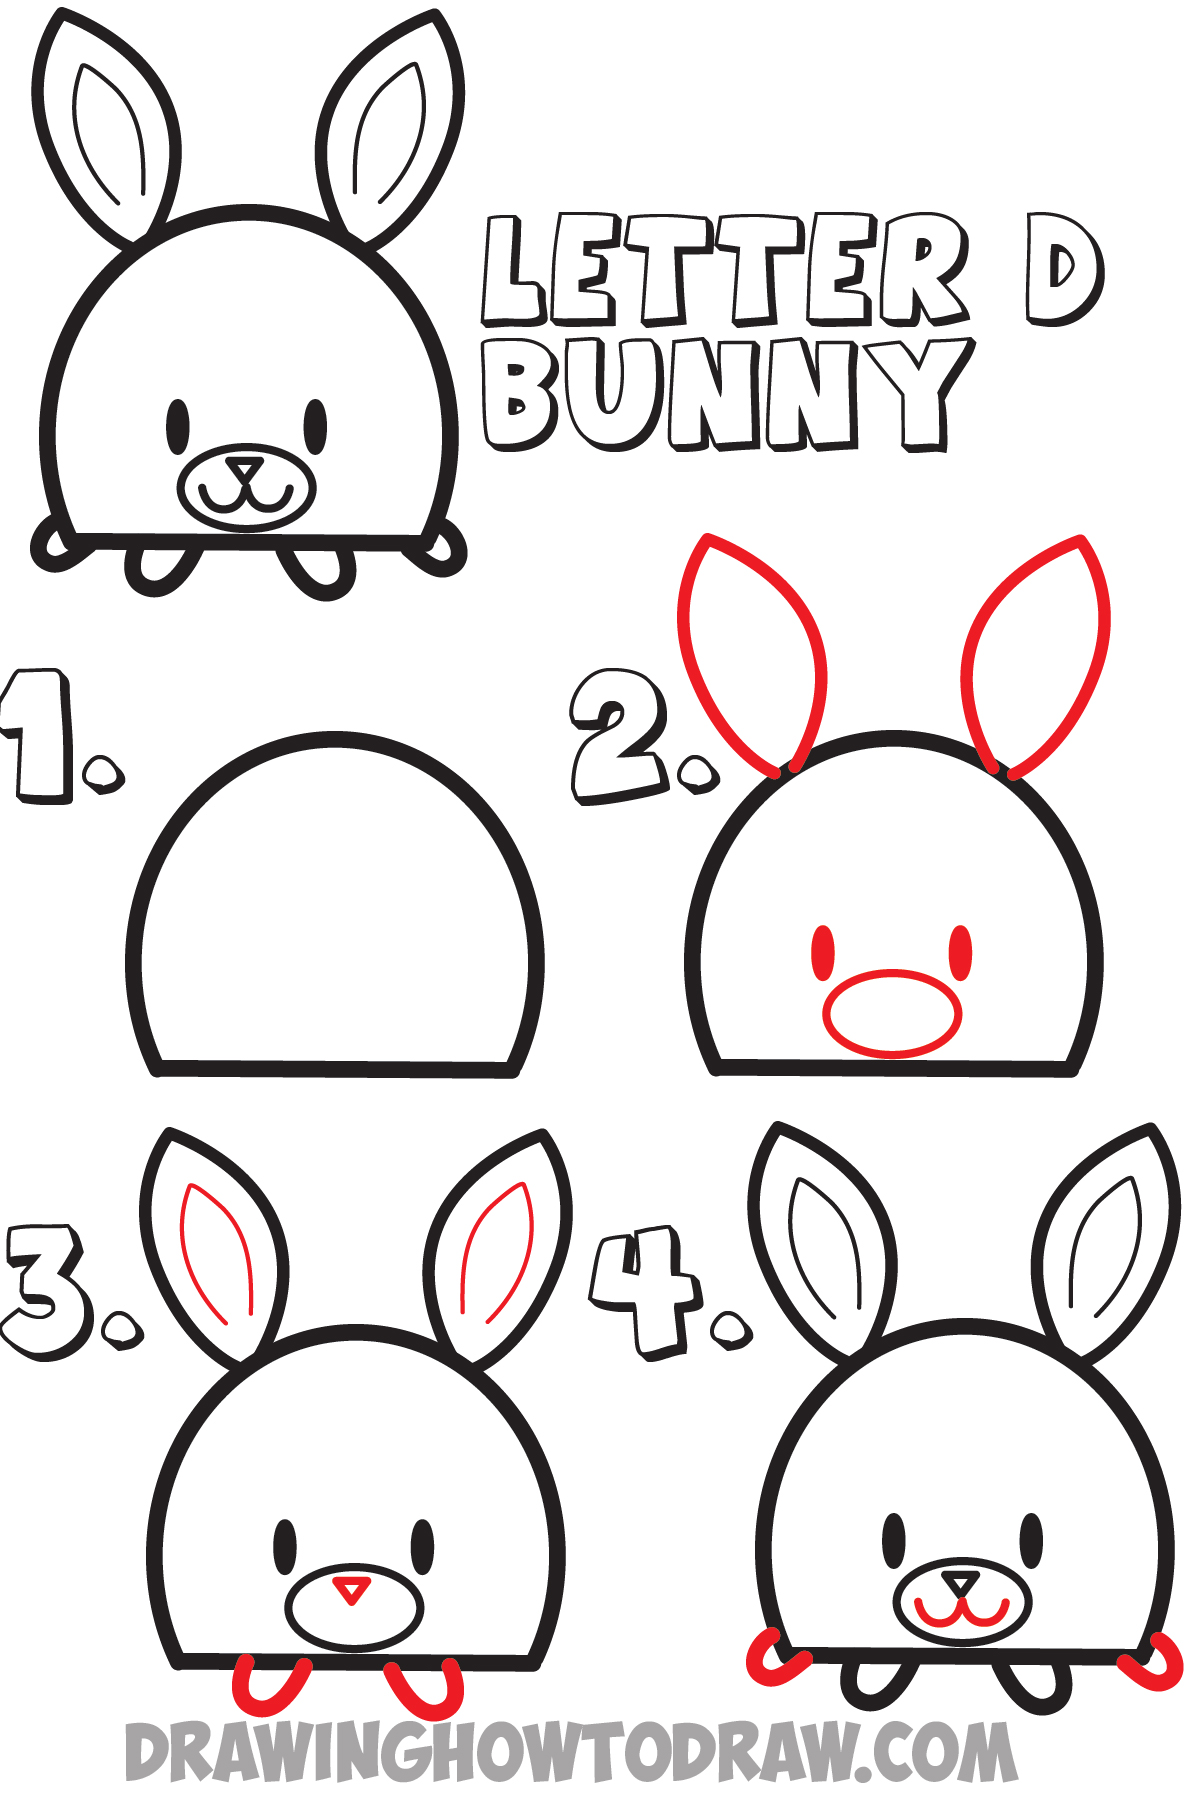 how to draw a cartoon bunny rabbit from the letter D